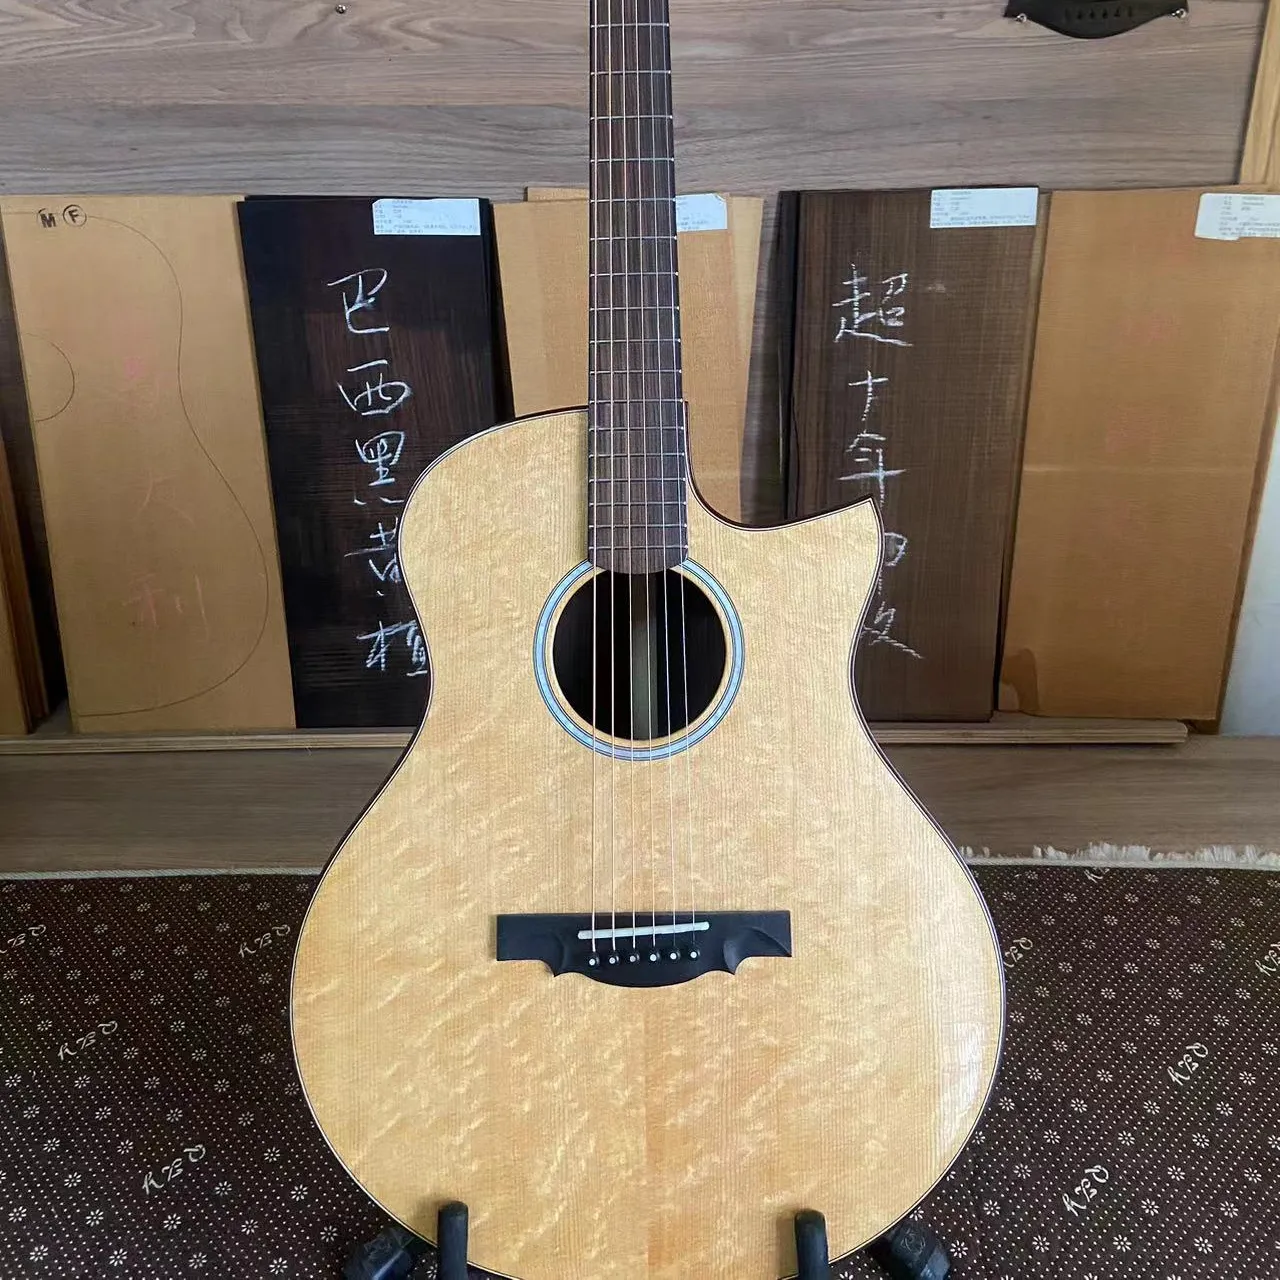 JD-890 40 inch all solid top spruce acoustic guitar China hand made high quality guitar